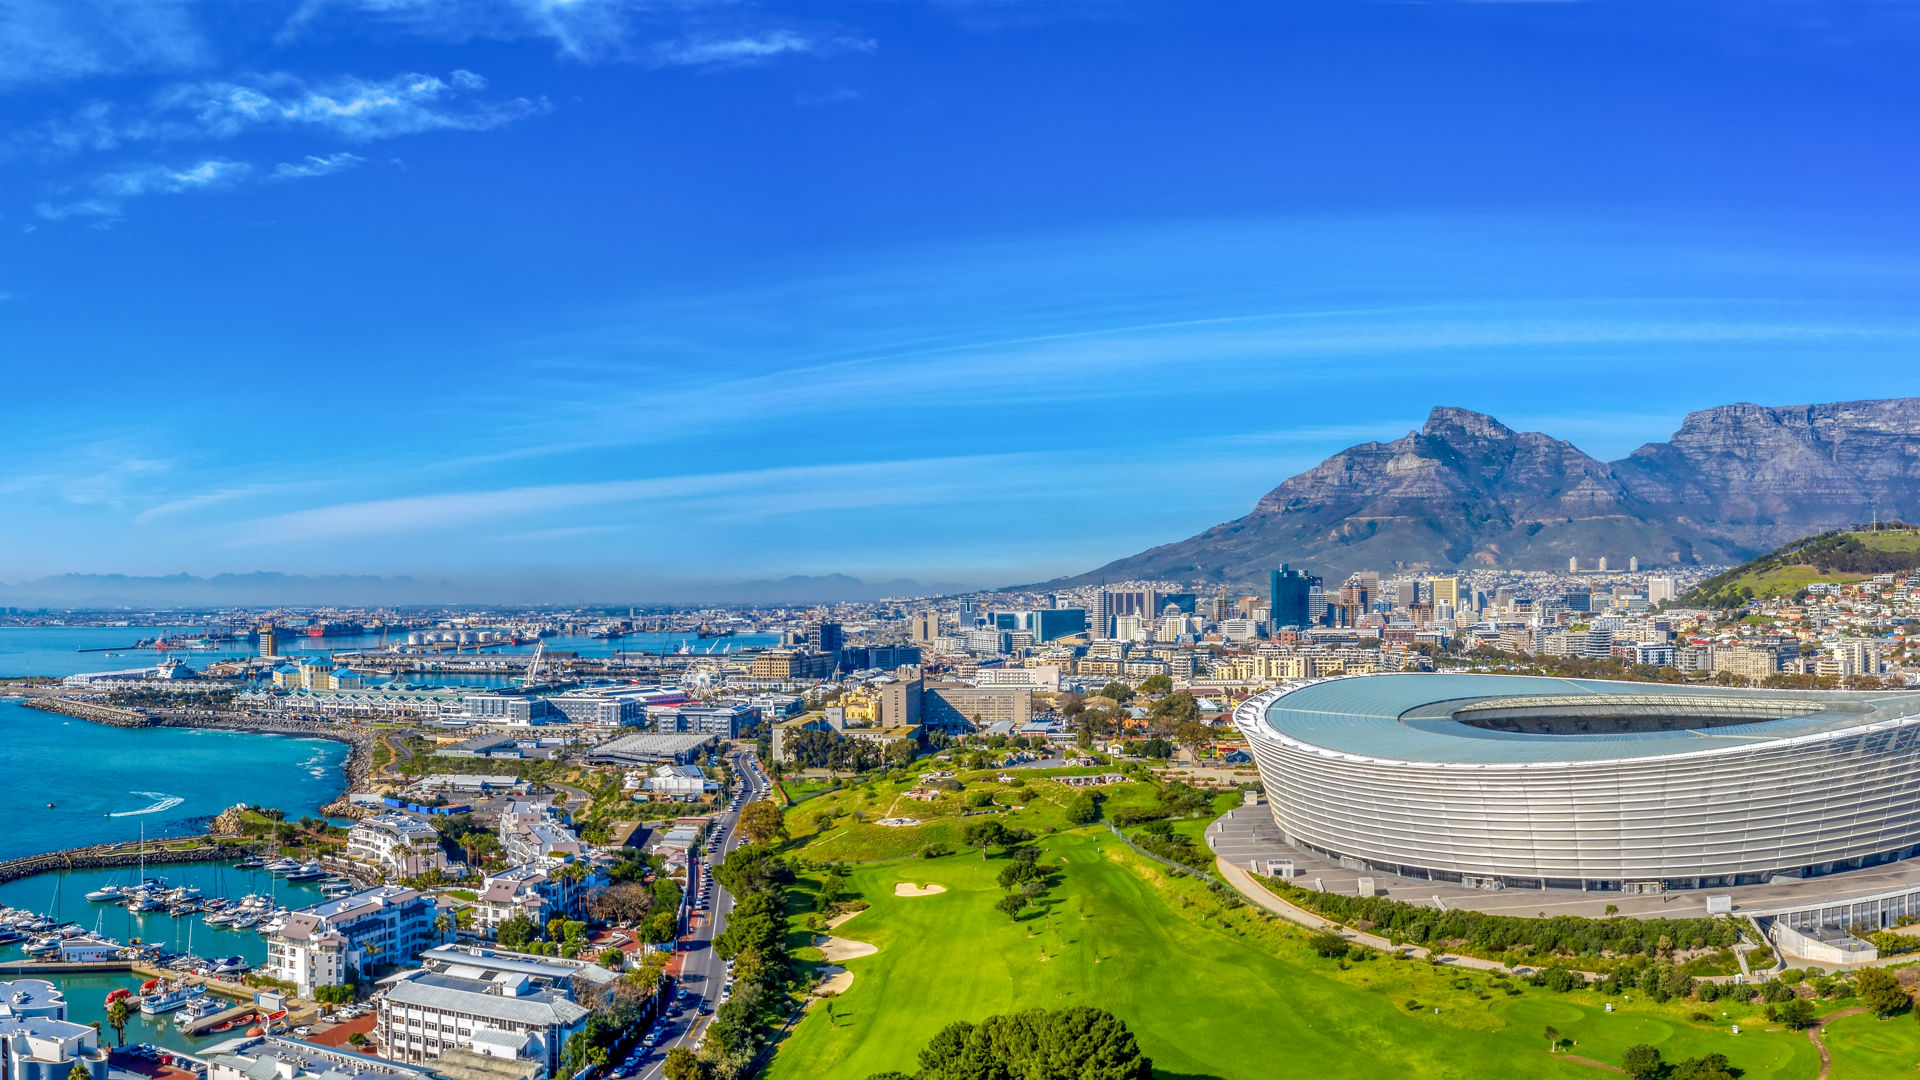 An aerial view of the legislative capital of South Africa, the scenic Cape Town